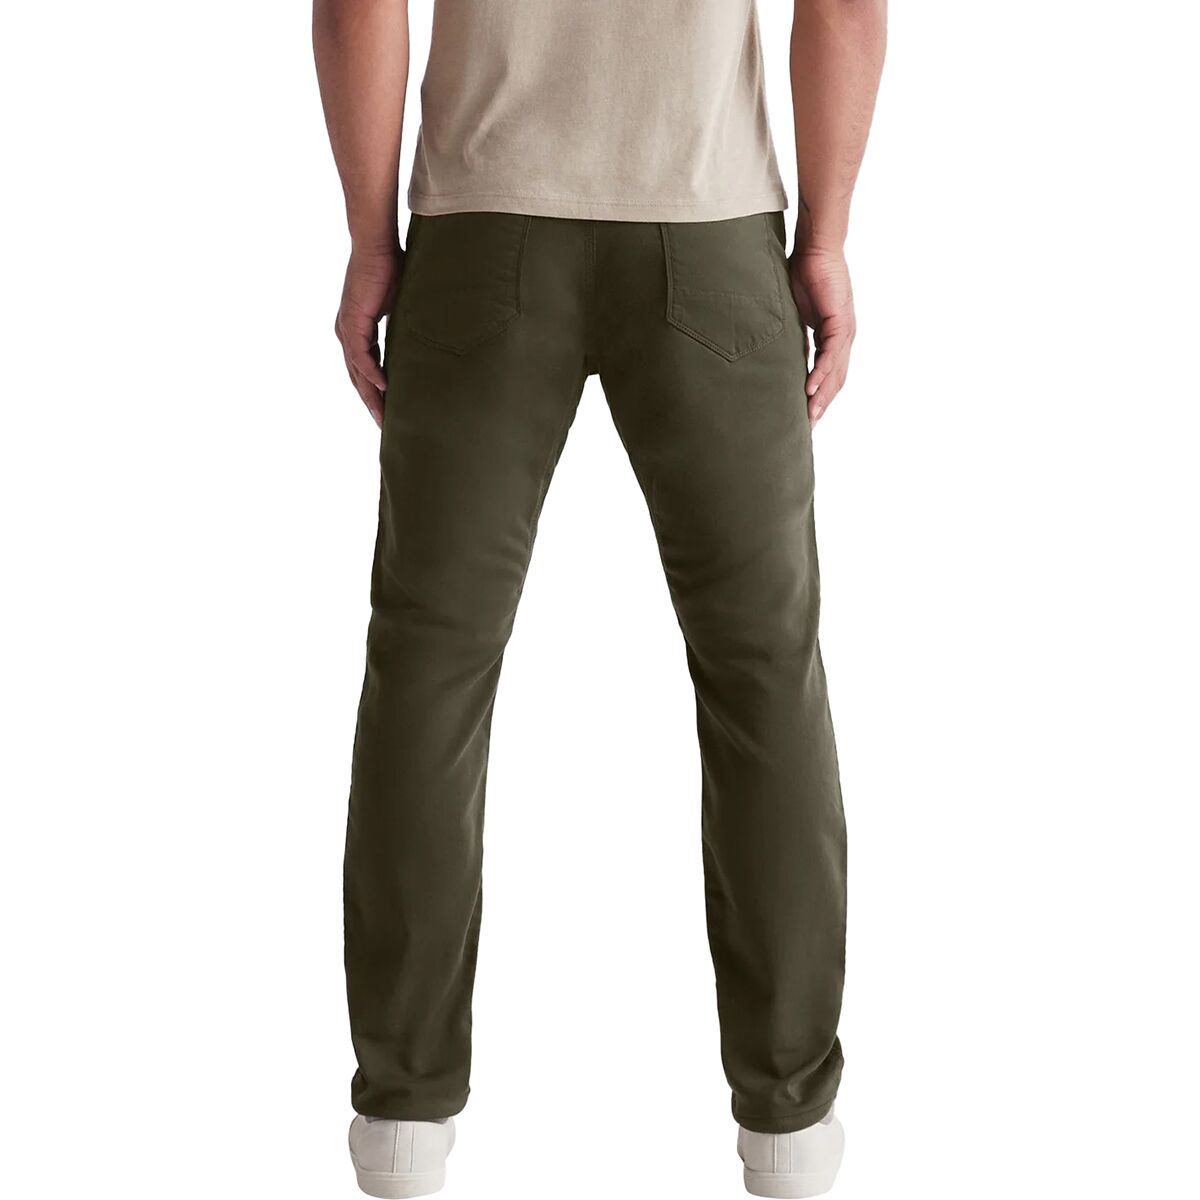 DU/ER No Sweat Pants Relaxed Fit Review